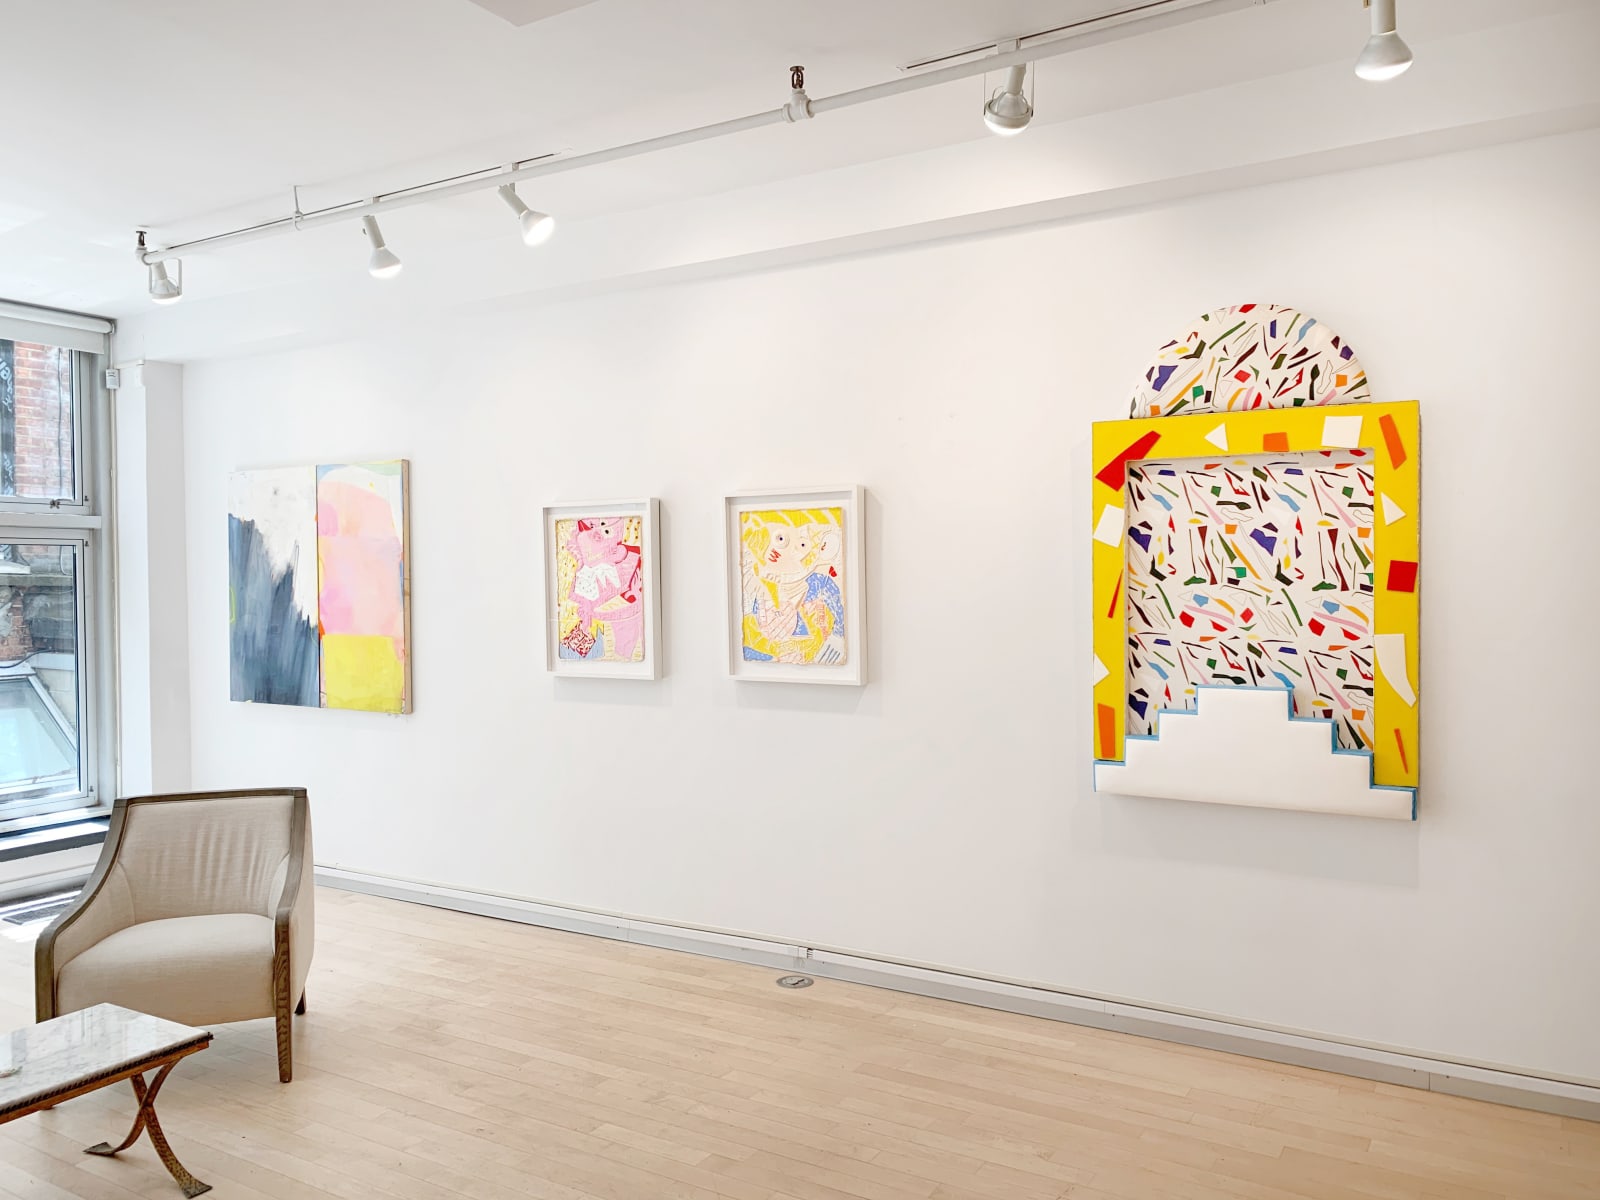 Installation view: Taggart Times 7